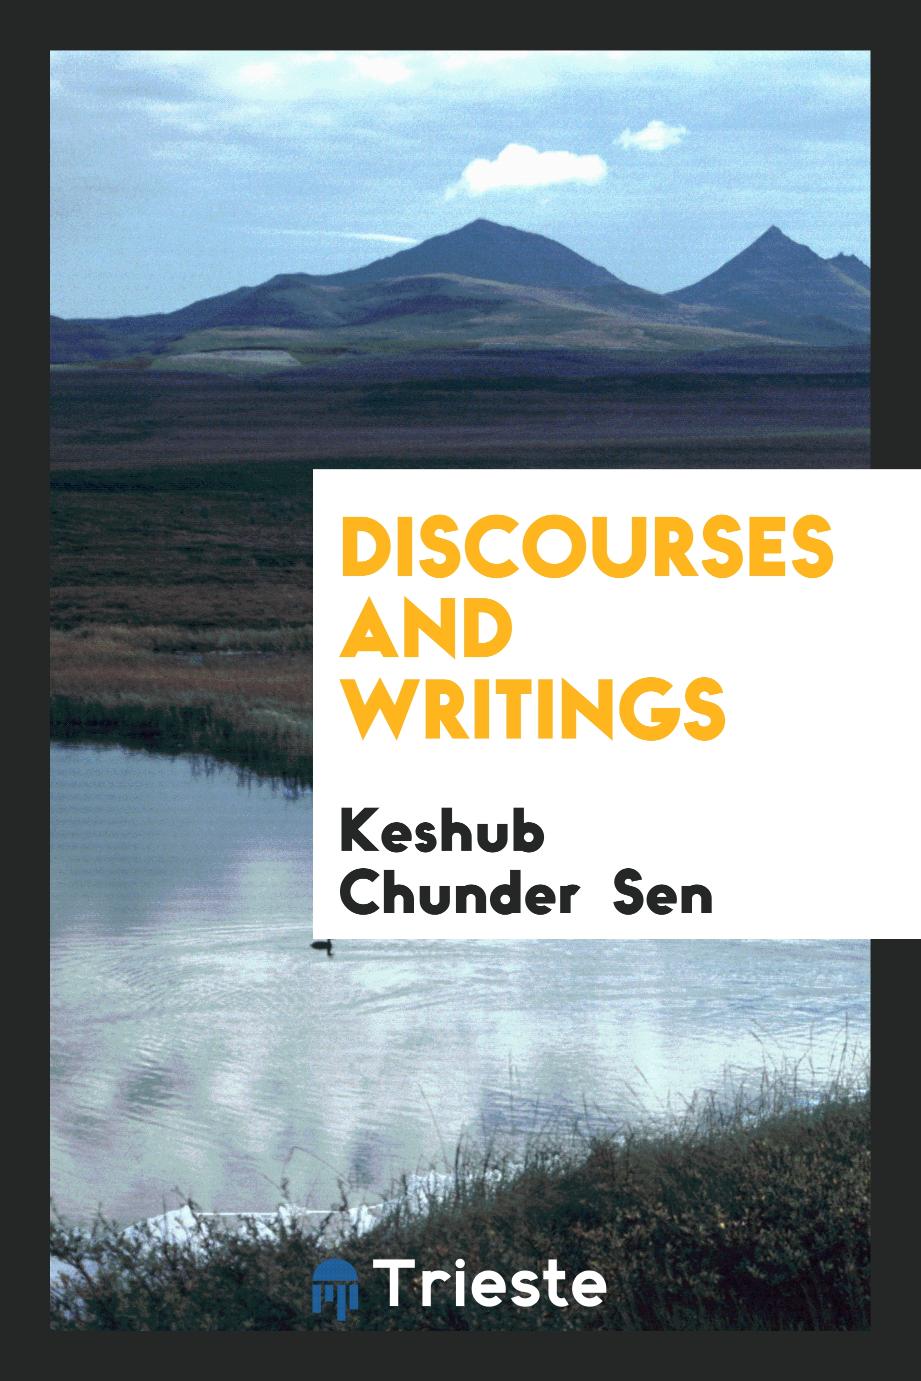 Discourses and Writings